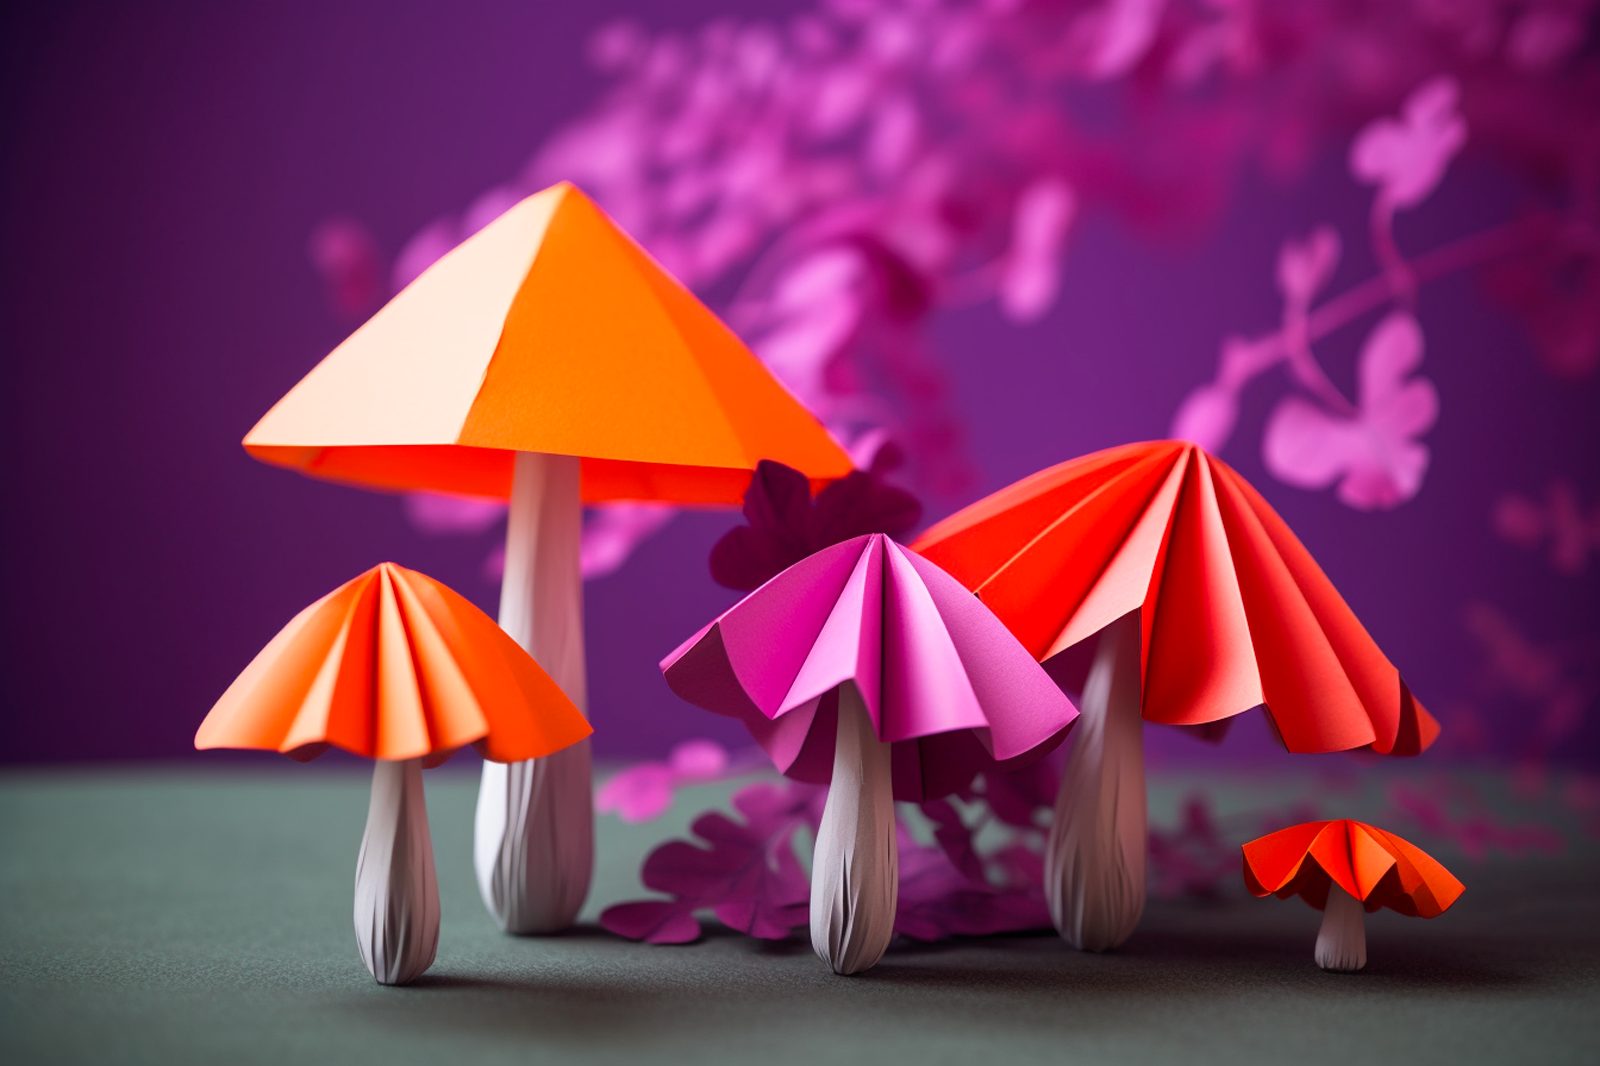 Assorted multicolored mushrooms arranged on a gray surface, set against a stunning purple background featuring a tree in matching purple hues